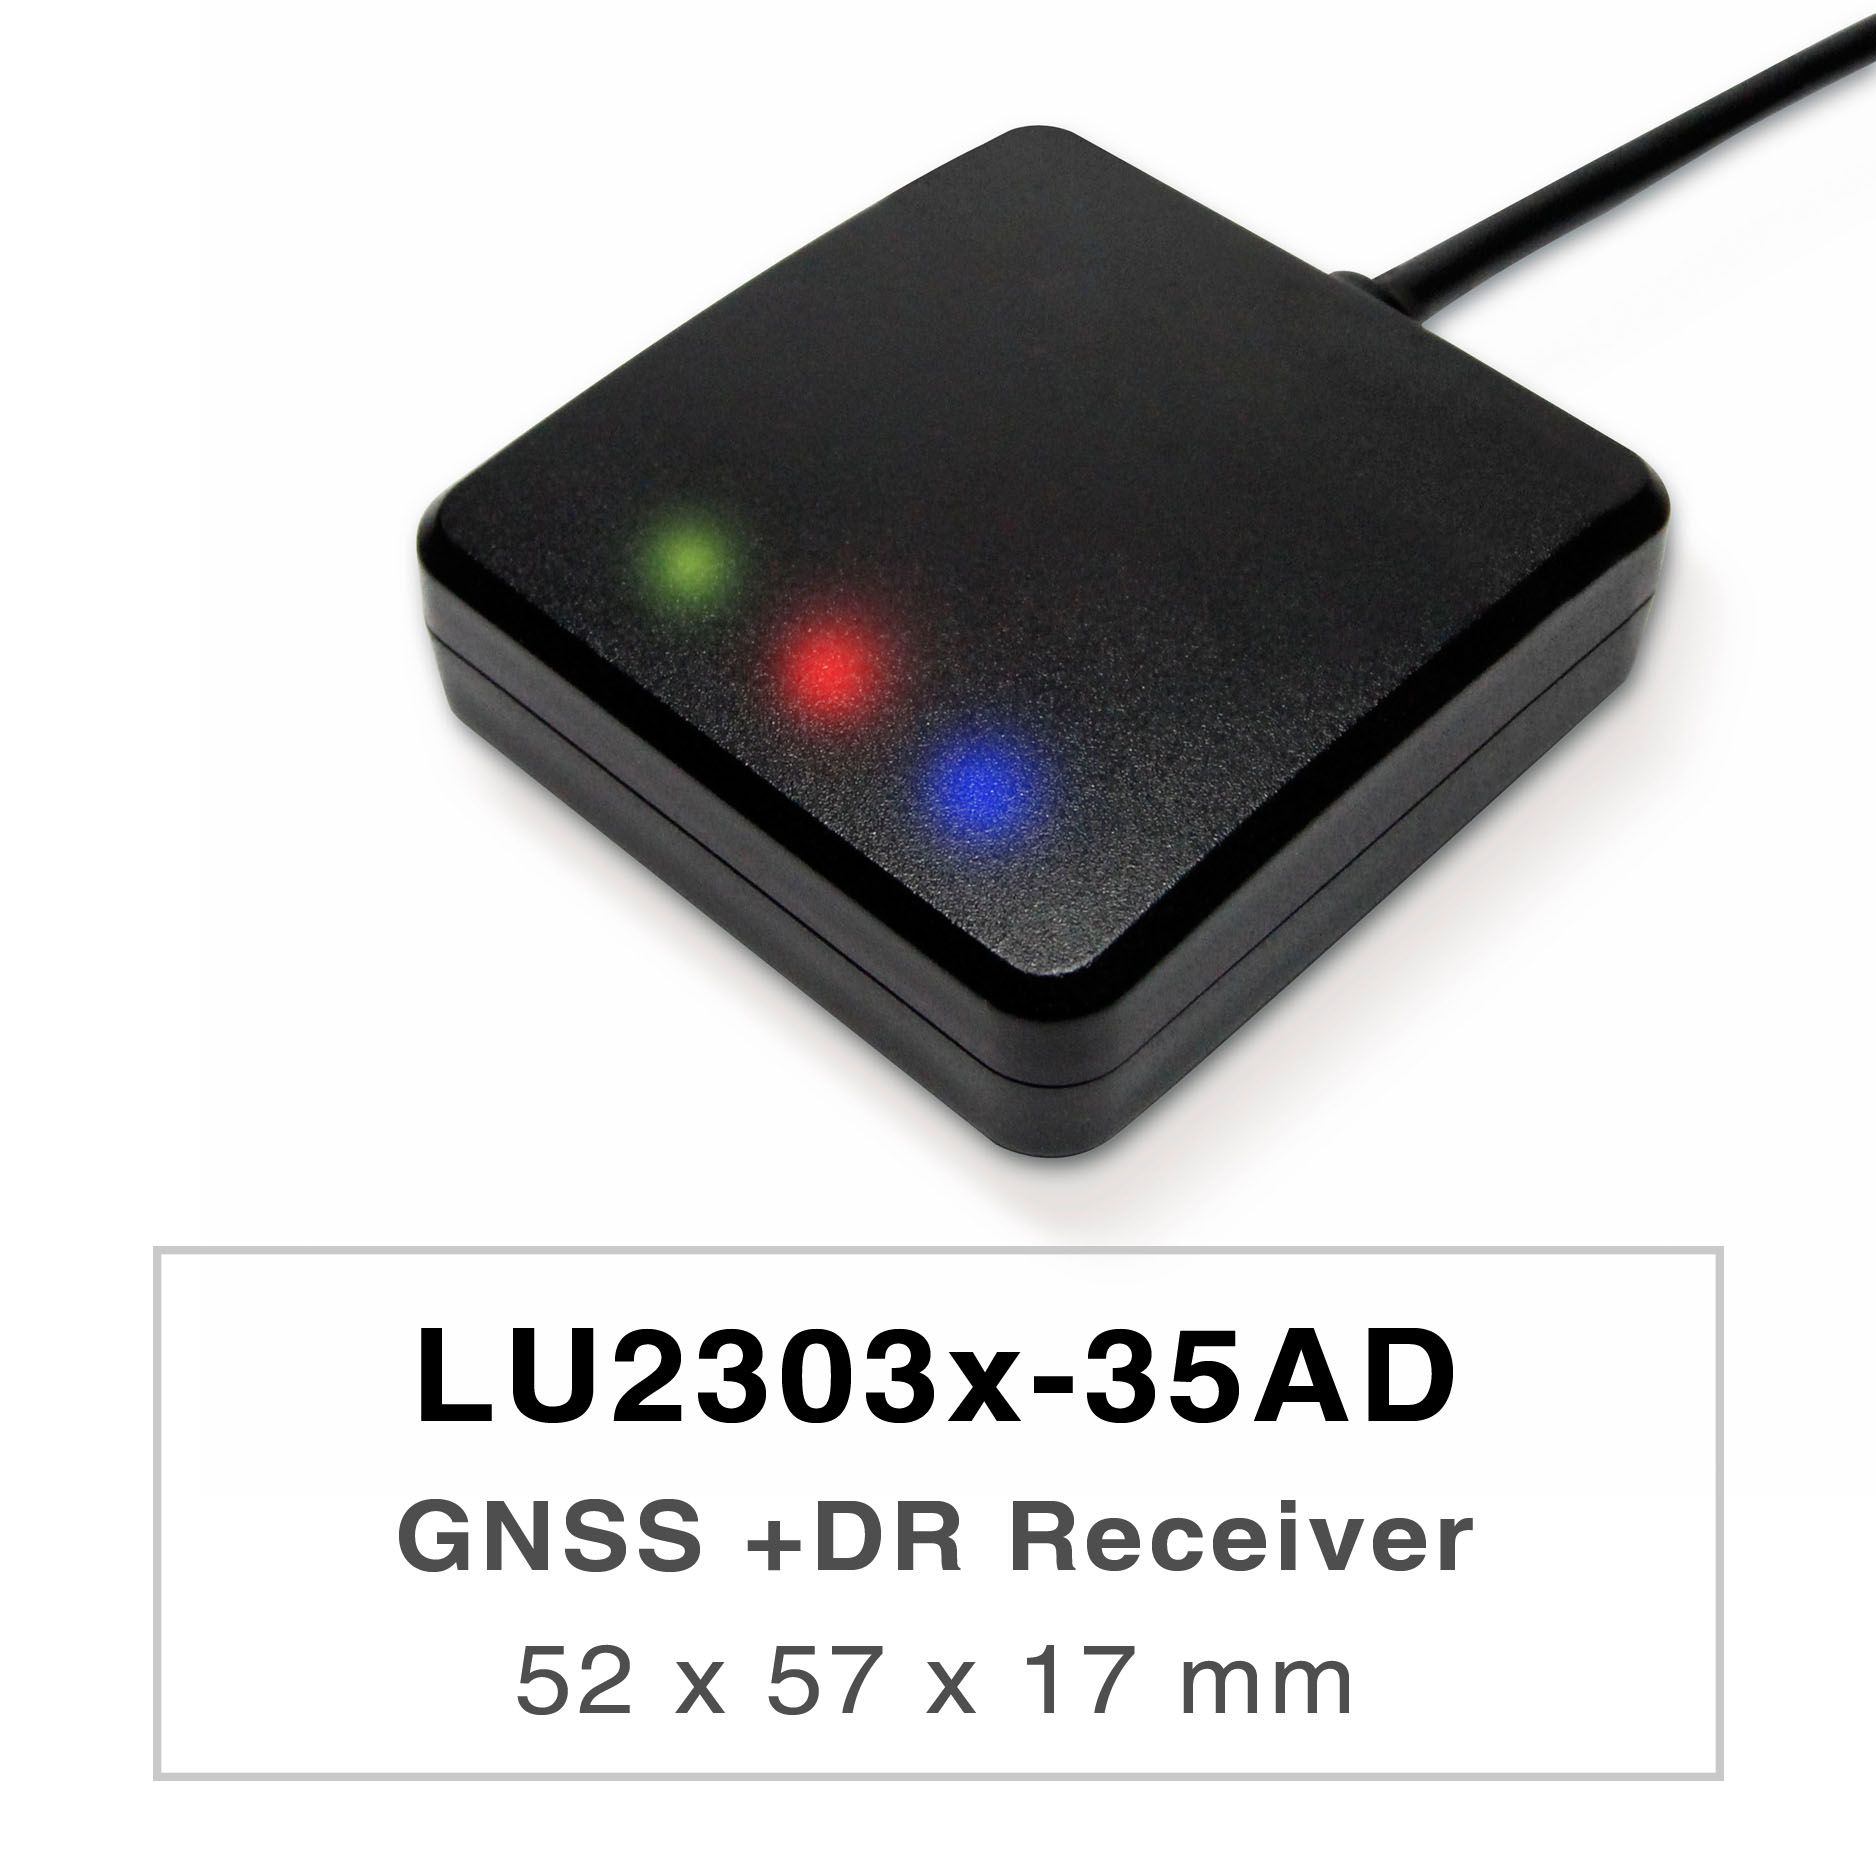 LU2303x-35AD series products are high-performance dual-band GNSS UDR (Untethered Dead Reckoning) receivers (also known as GNSS mouse) that are capable of tracking all global civil navigation systems (GPS, GLONASS, BDS, GALILEO, QZSS). The GNSS mouse will acquire both L1 and L5 signals at a time while providing the better position accuracy.